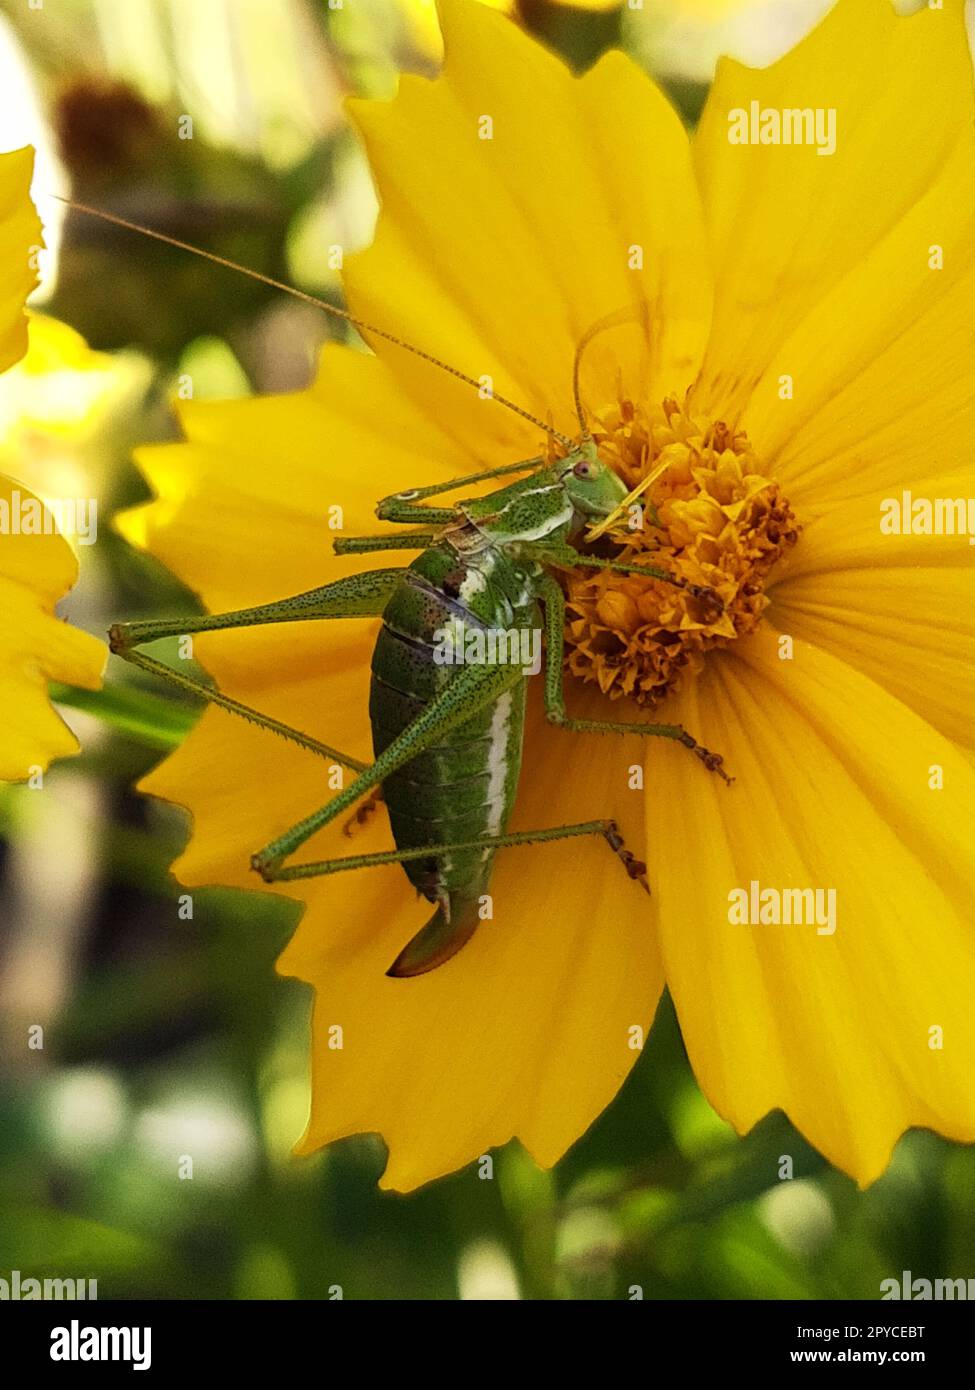 Grasshopper feeding on the pollen of a flower close-up Stock Photo